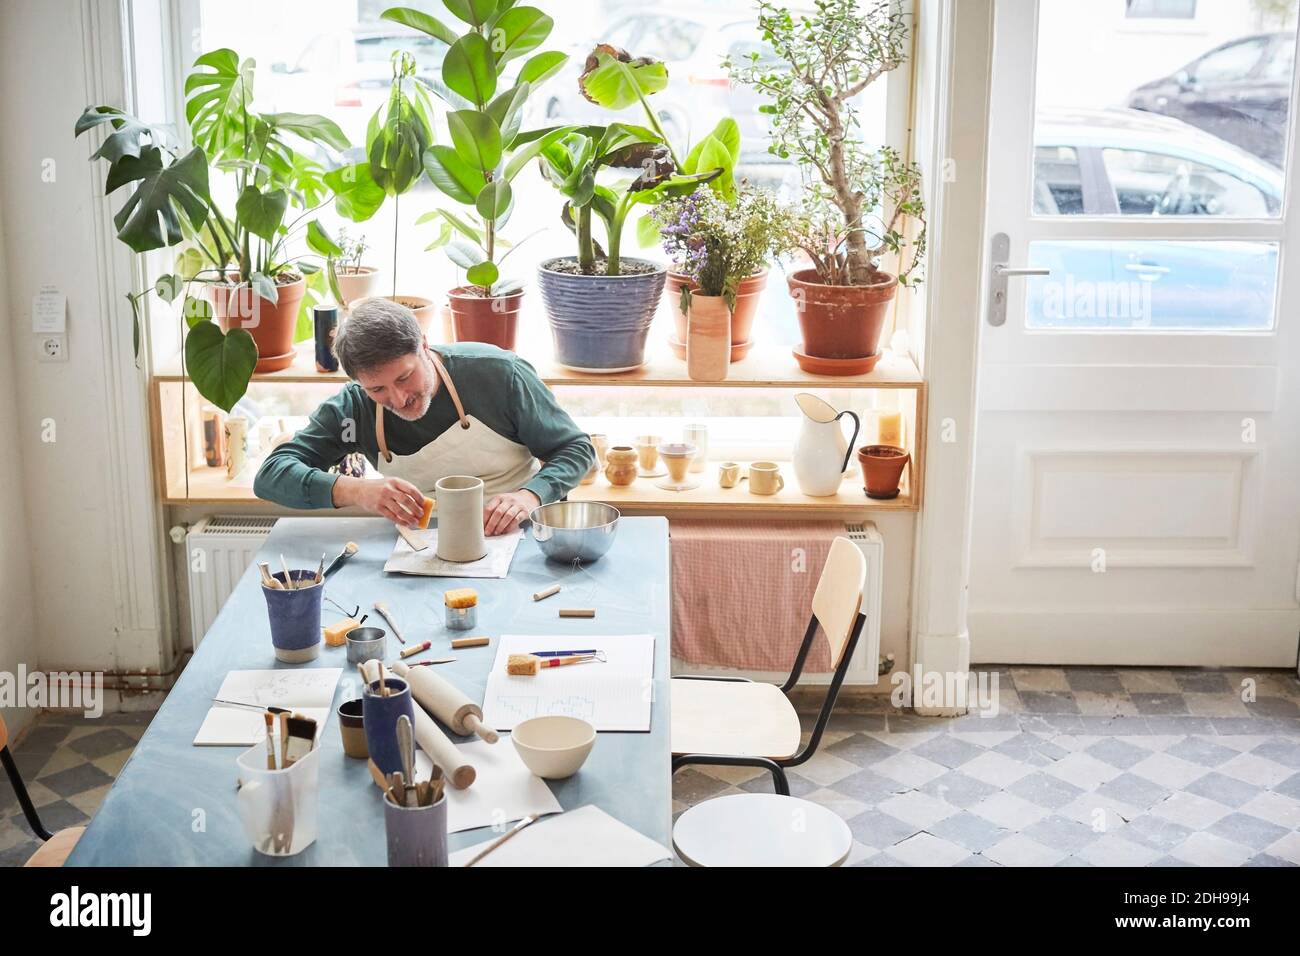 Mature man making craft product at table in pottery class Stock Photo